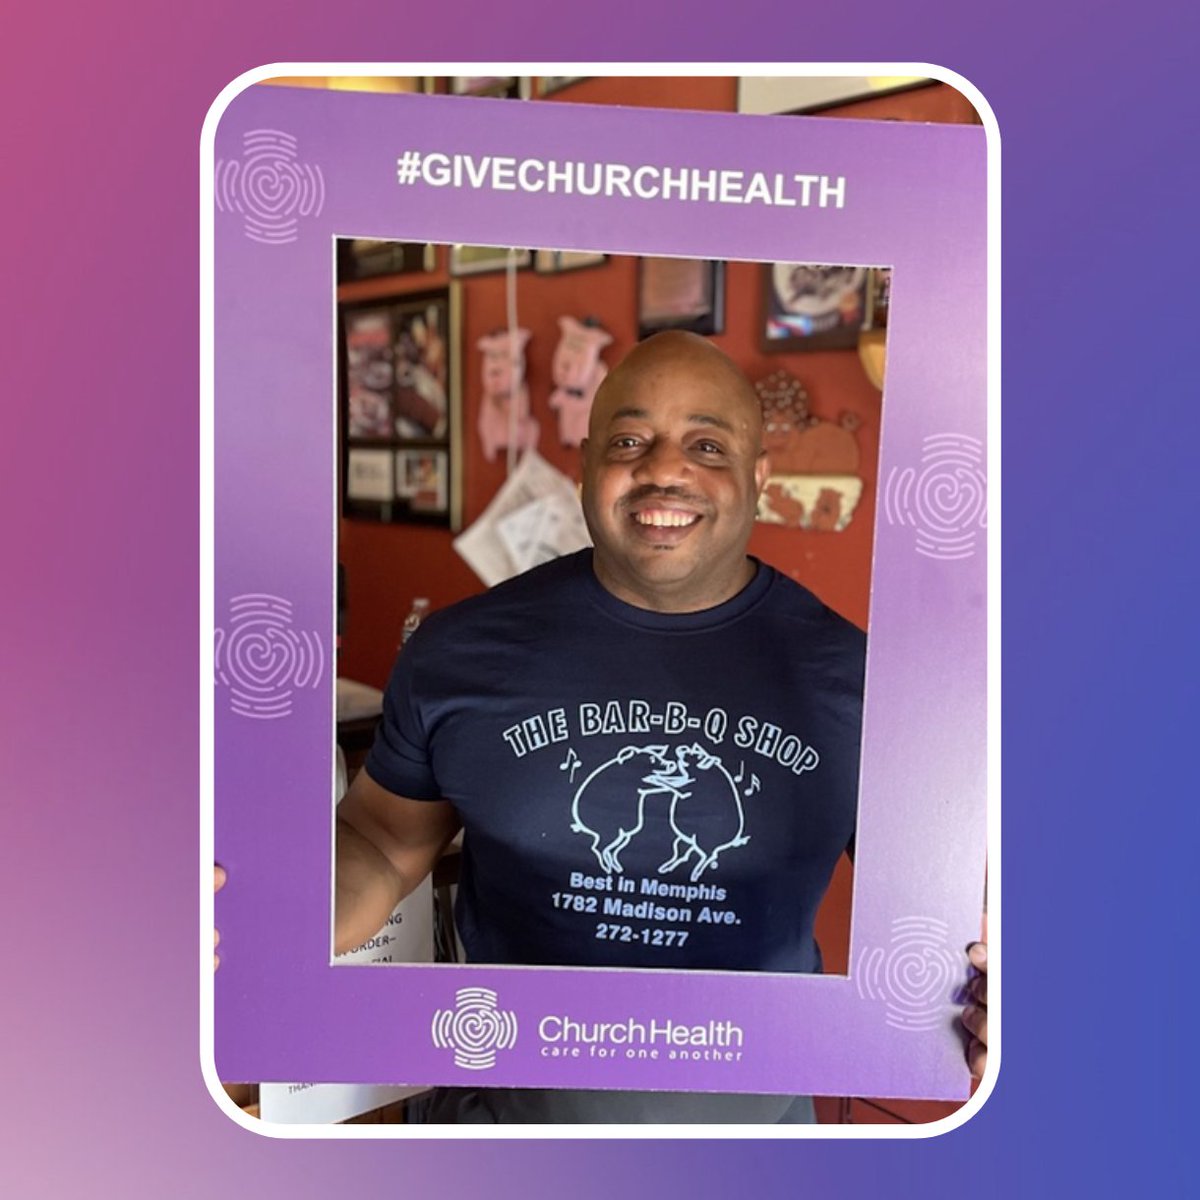 Today is @ChurchHealth901's #GivingDay & we'd love for you to donate if you can! 🙏🏾 Church Health is an amazing organization & all gifts made today will be matched - so if you give today it'll go a long way! 👏🏾 Follow this link to give: ow.ly/Lecf50FDXBE #givechurchhealth